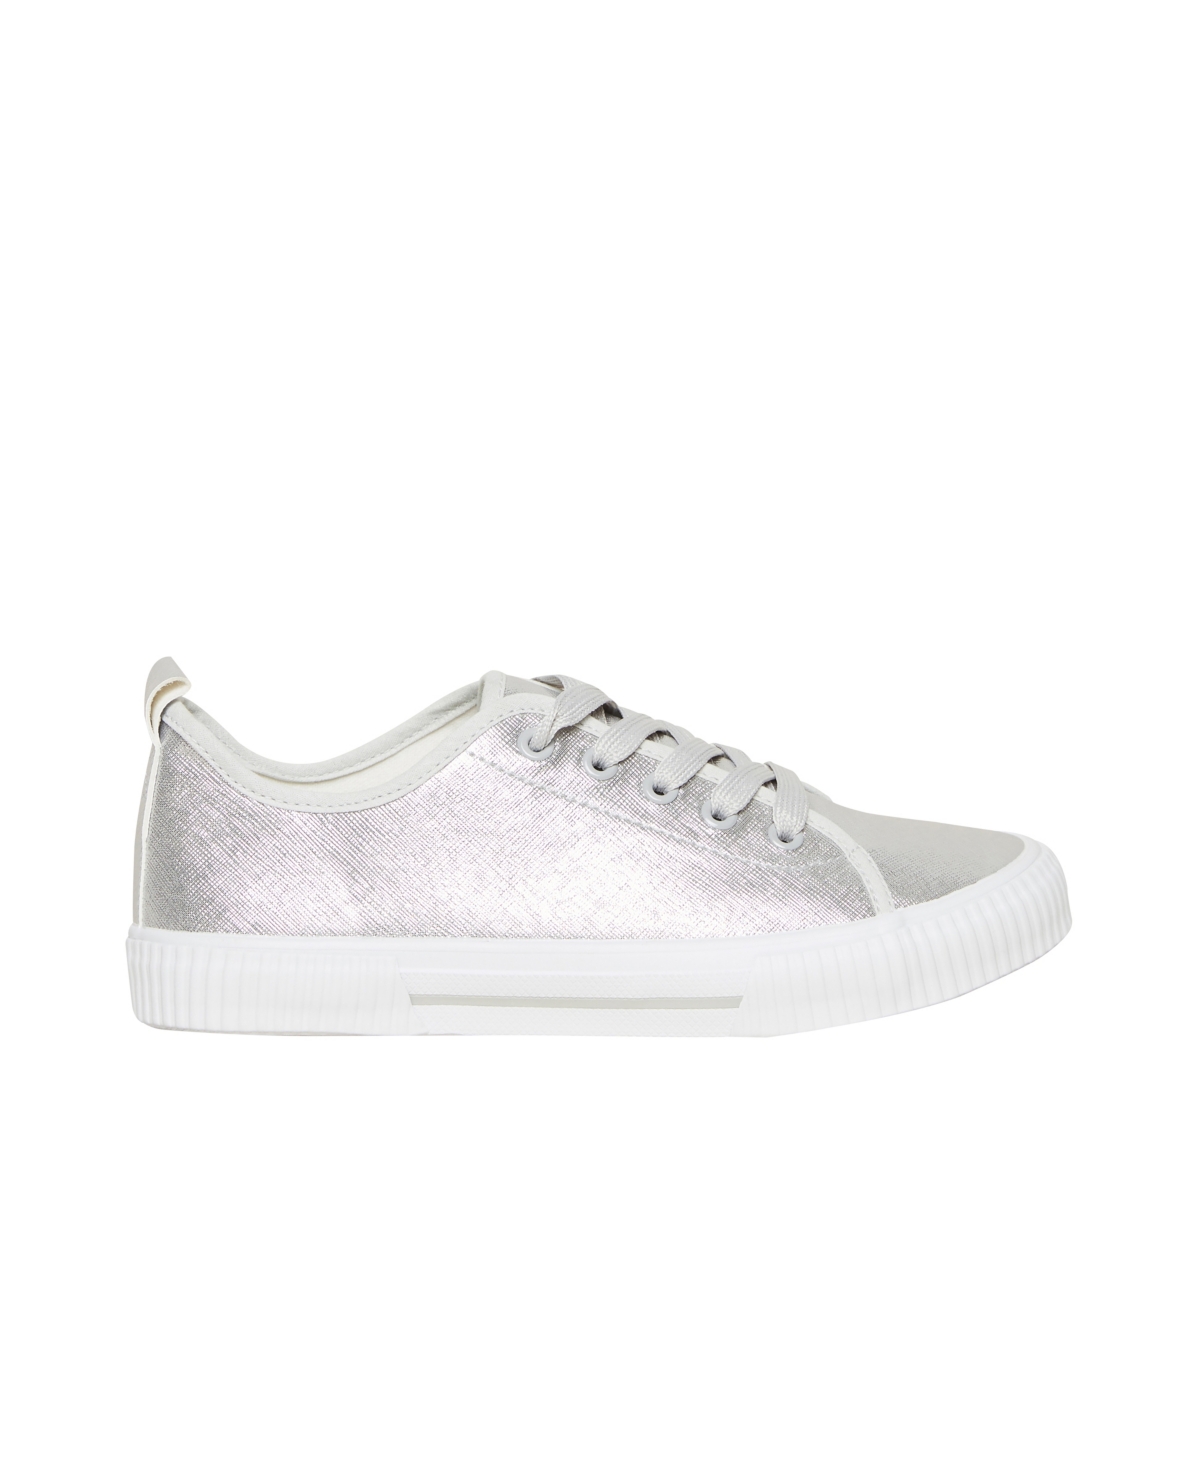 Wide Fit Metallic Lace Up Trainer - Metallic